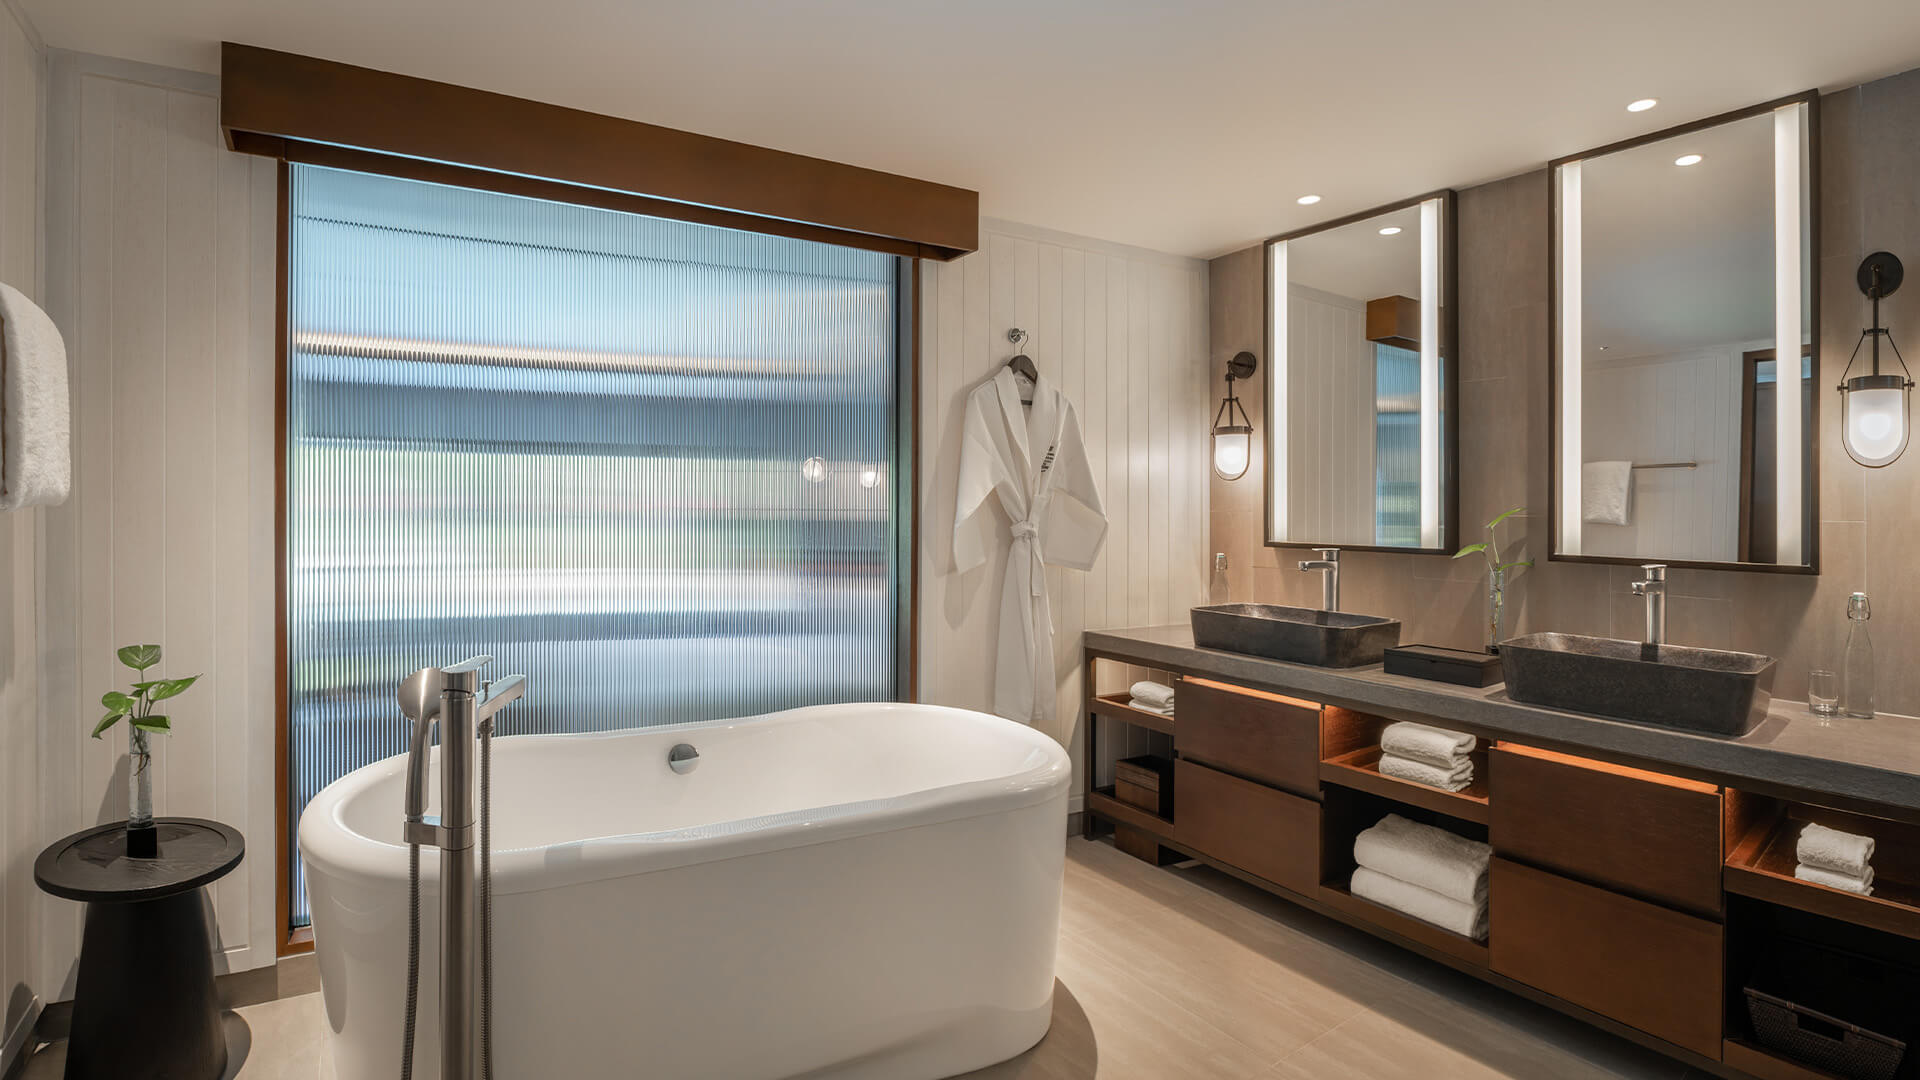 A luxury bathroom of a studio room at The Laguna Resort showing a large bathtub, robe, large mirror and sink